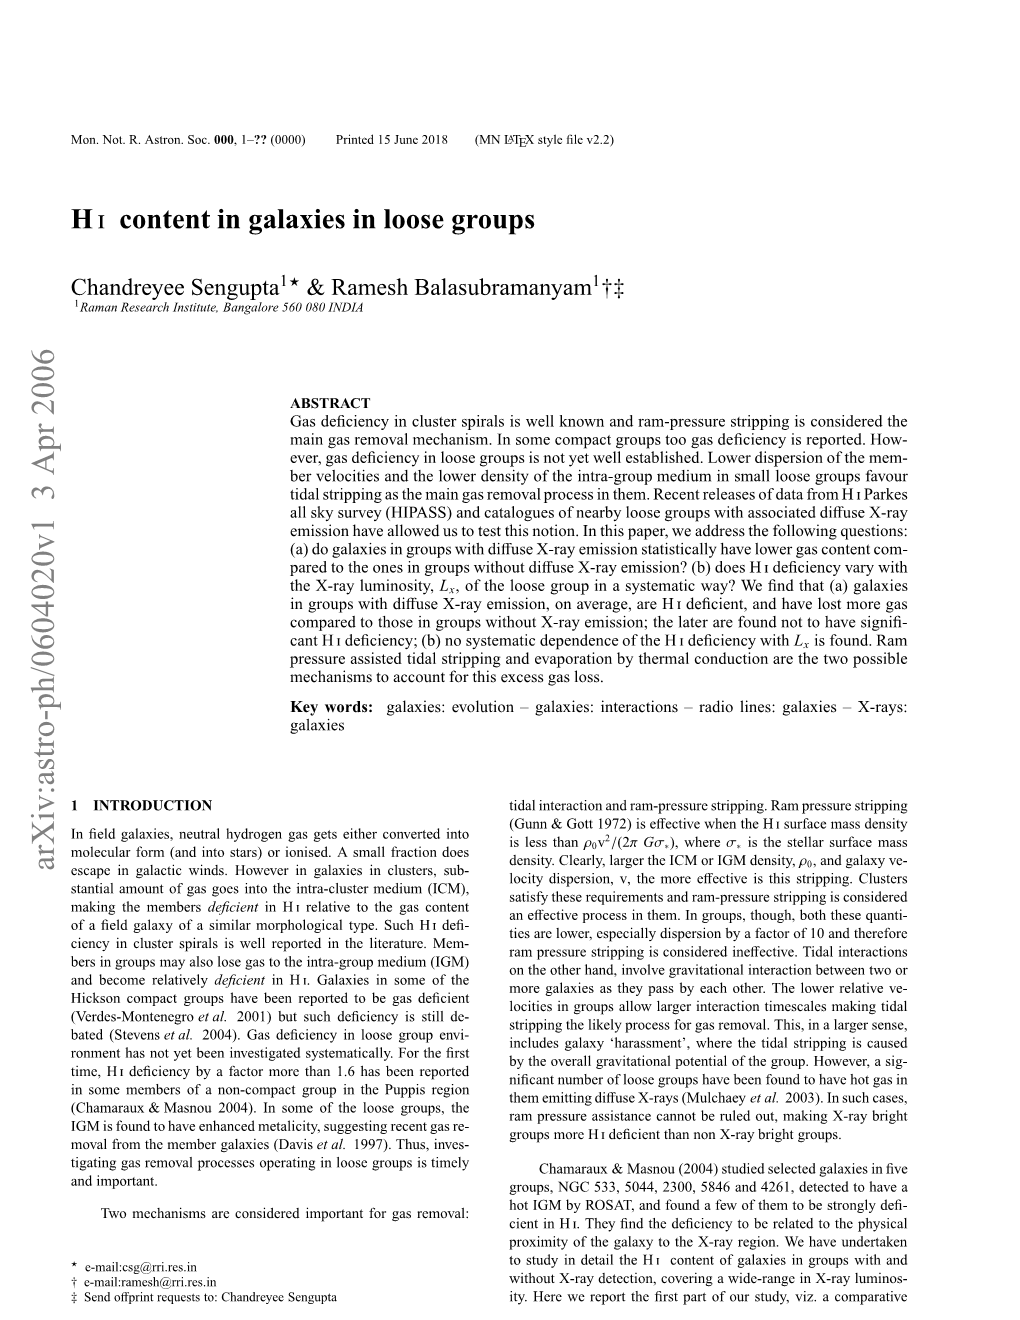 Hi Content in Galaxies in Loose Groups